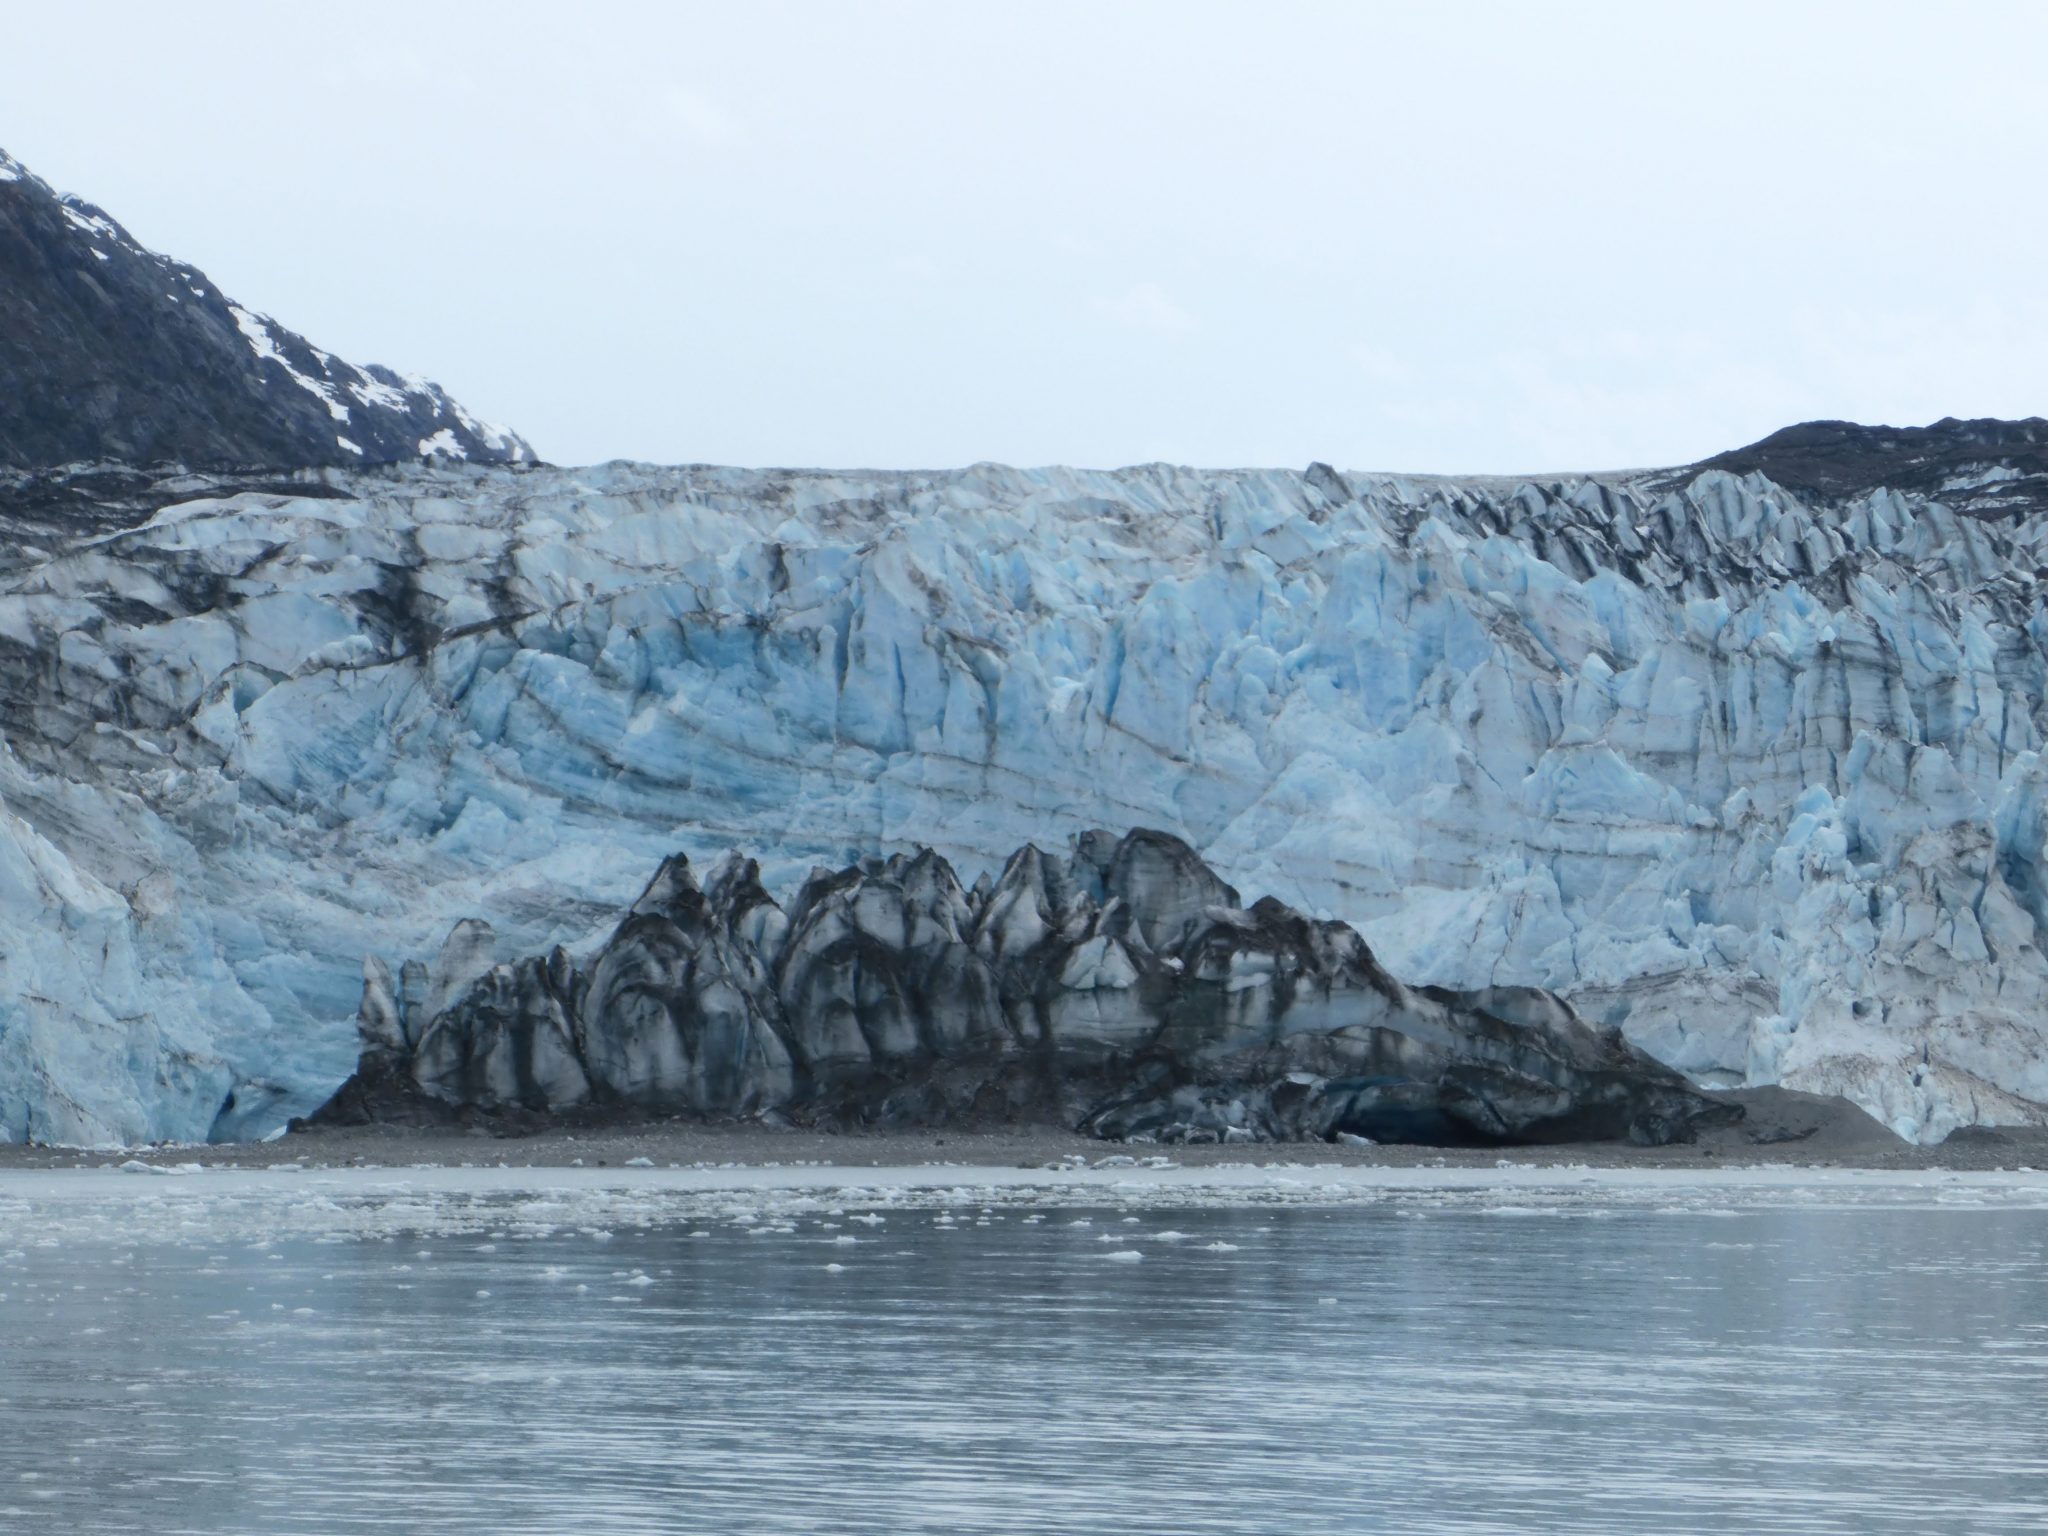 A glacier touches the sea in Glacier Bay. There is blue ice and in front of it the ice is gray and black where it is filled with rocks and gravel